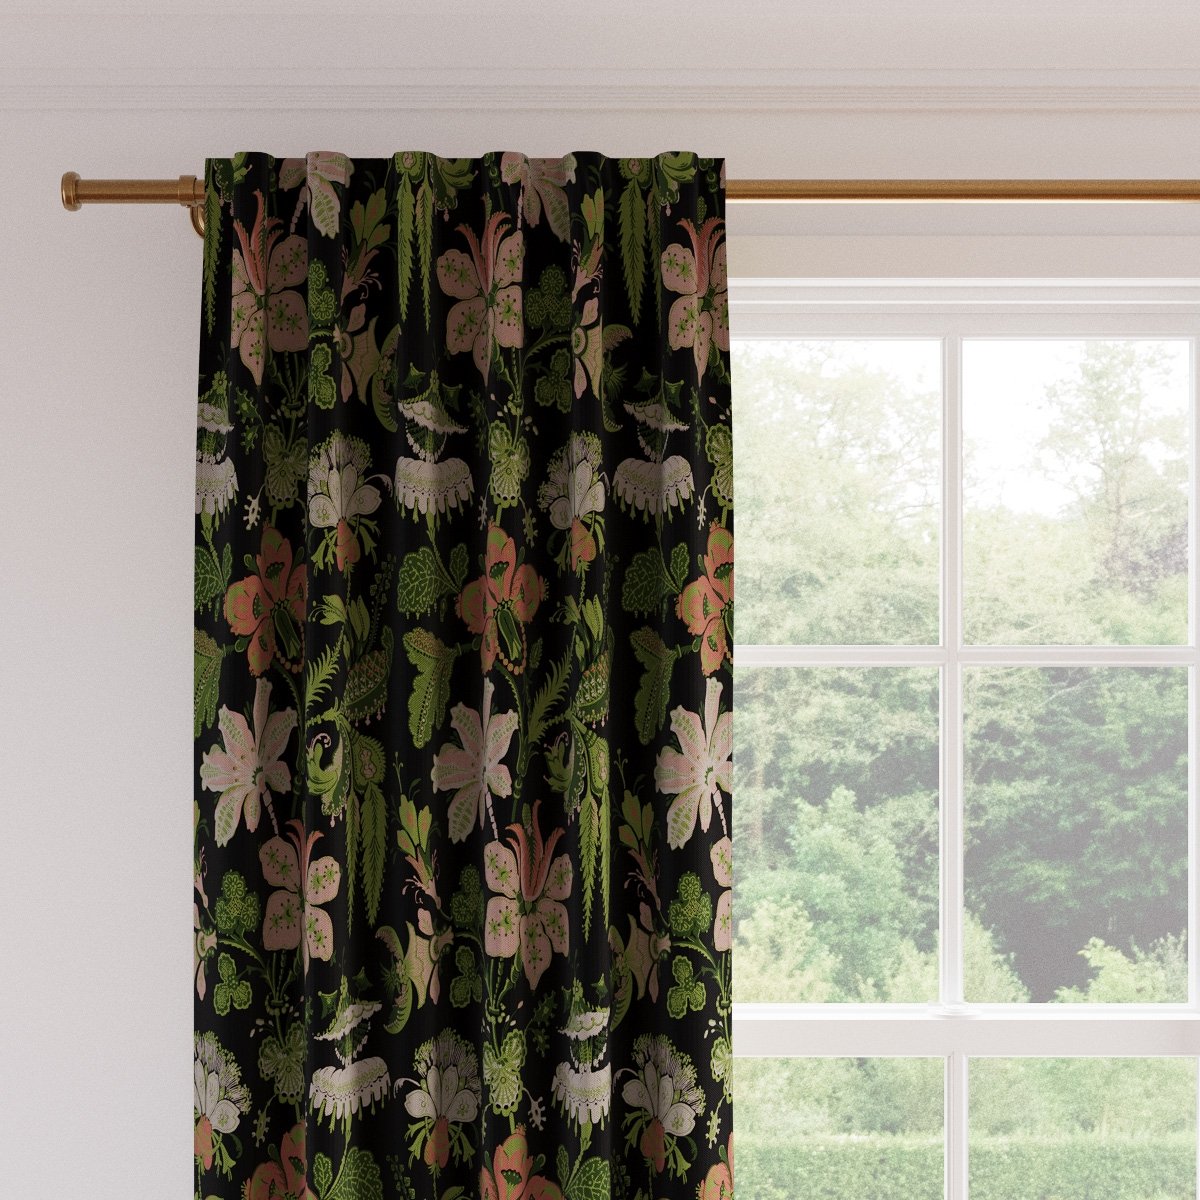 Printed Linen Curtain, Coral Onyx Rossetta, 50" x 96", Privacy - Image 1